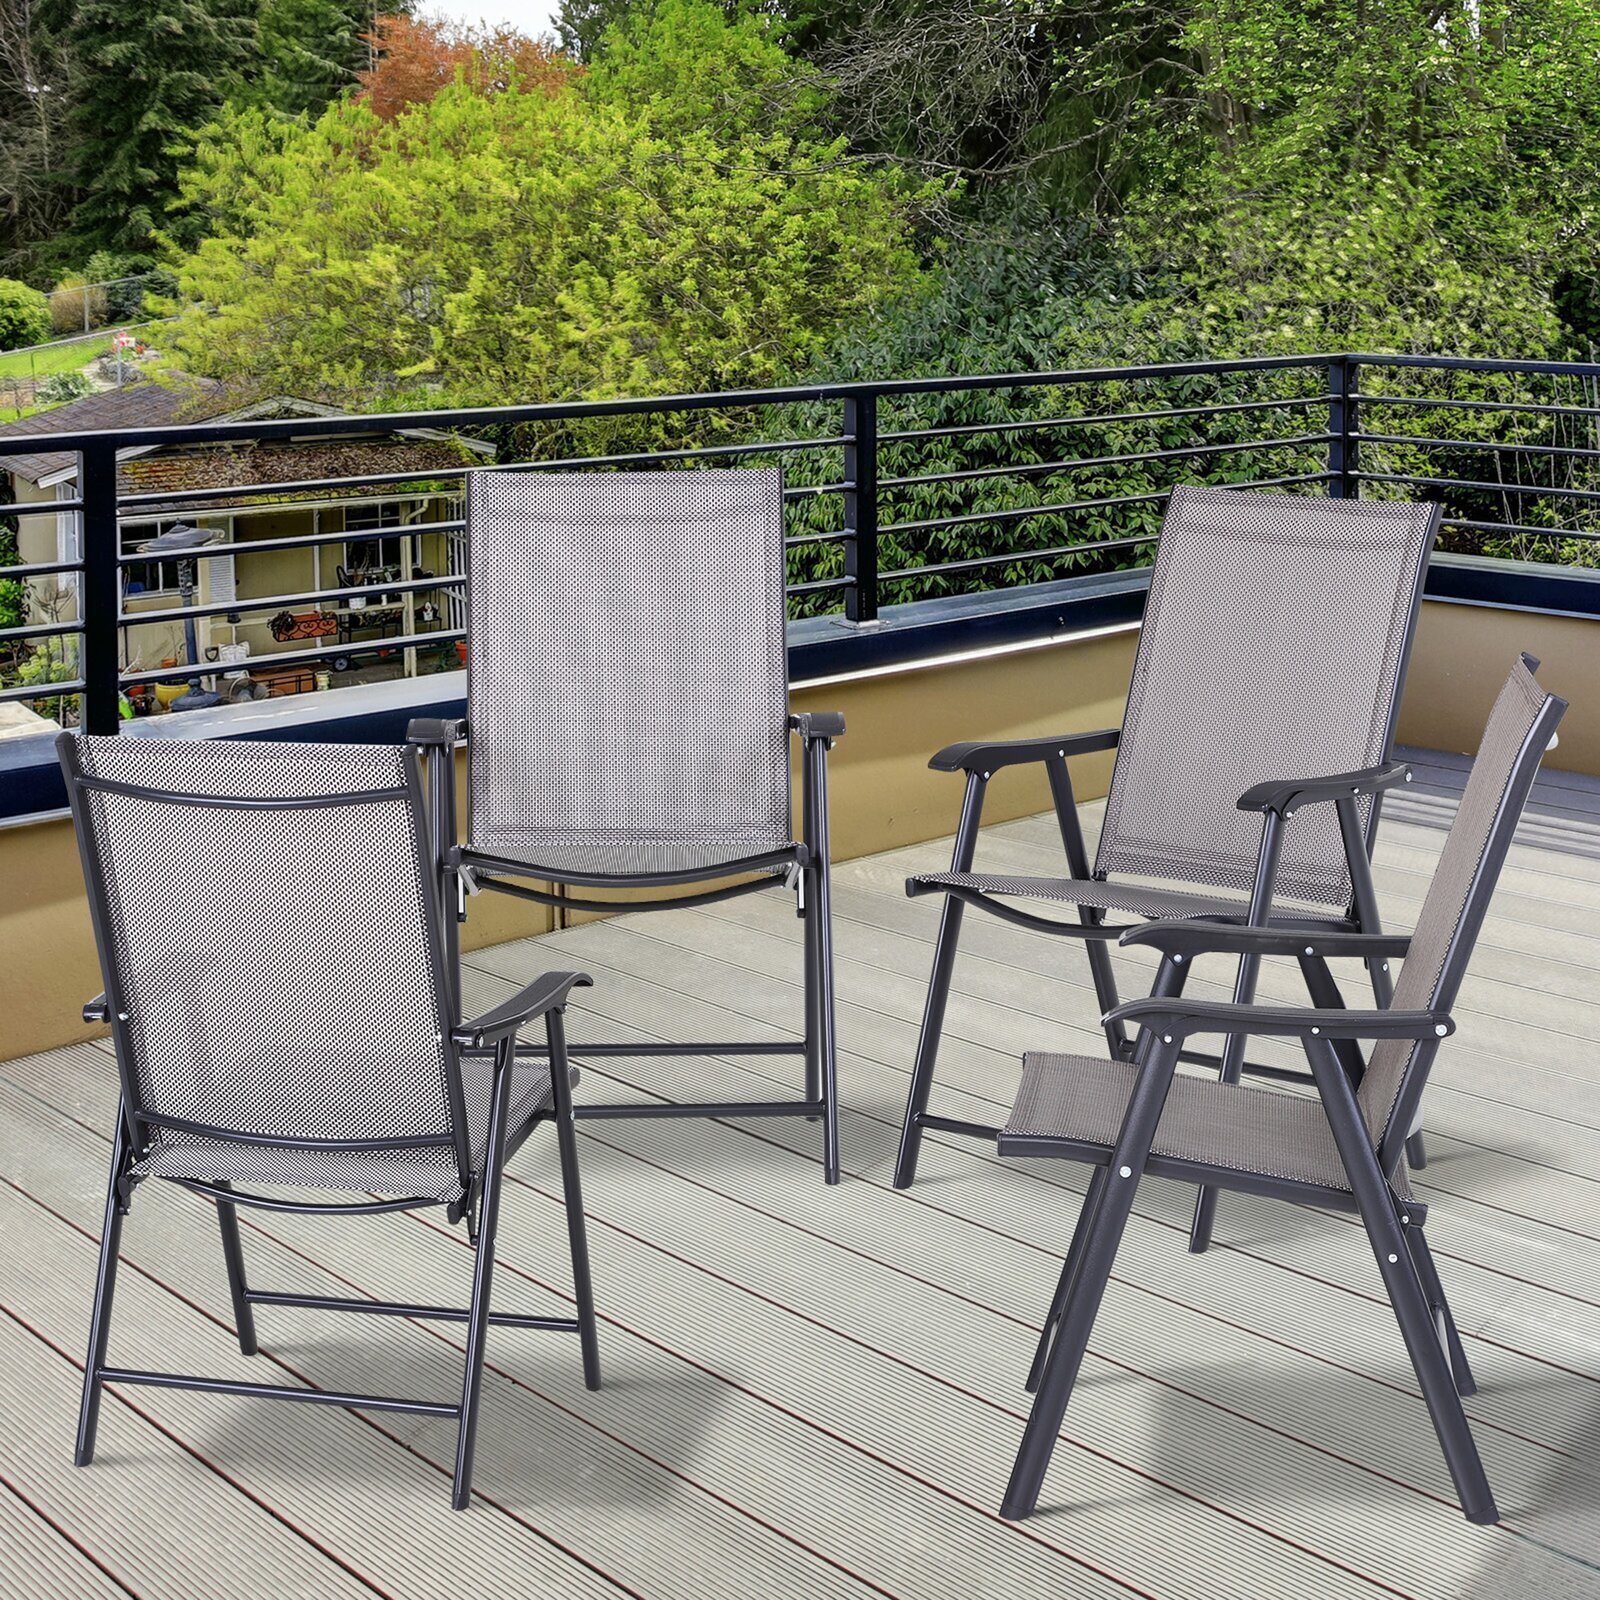 Steel and PVC Foldable Garden Chairs (Set of 4)